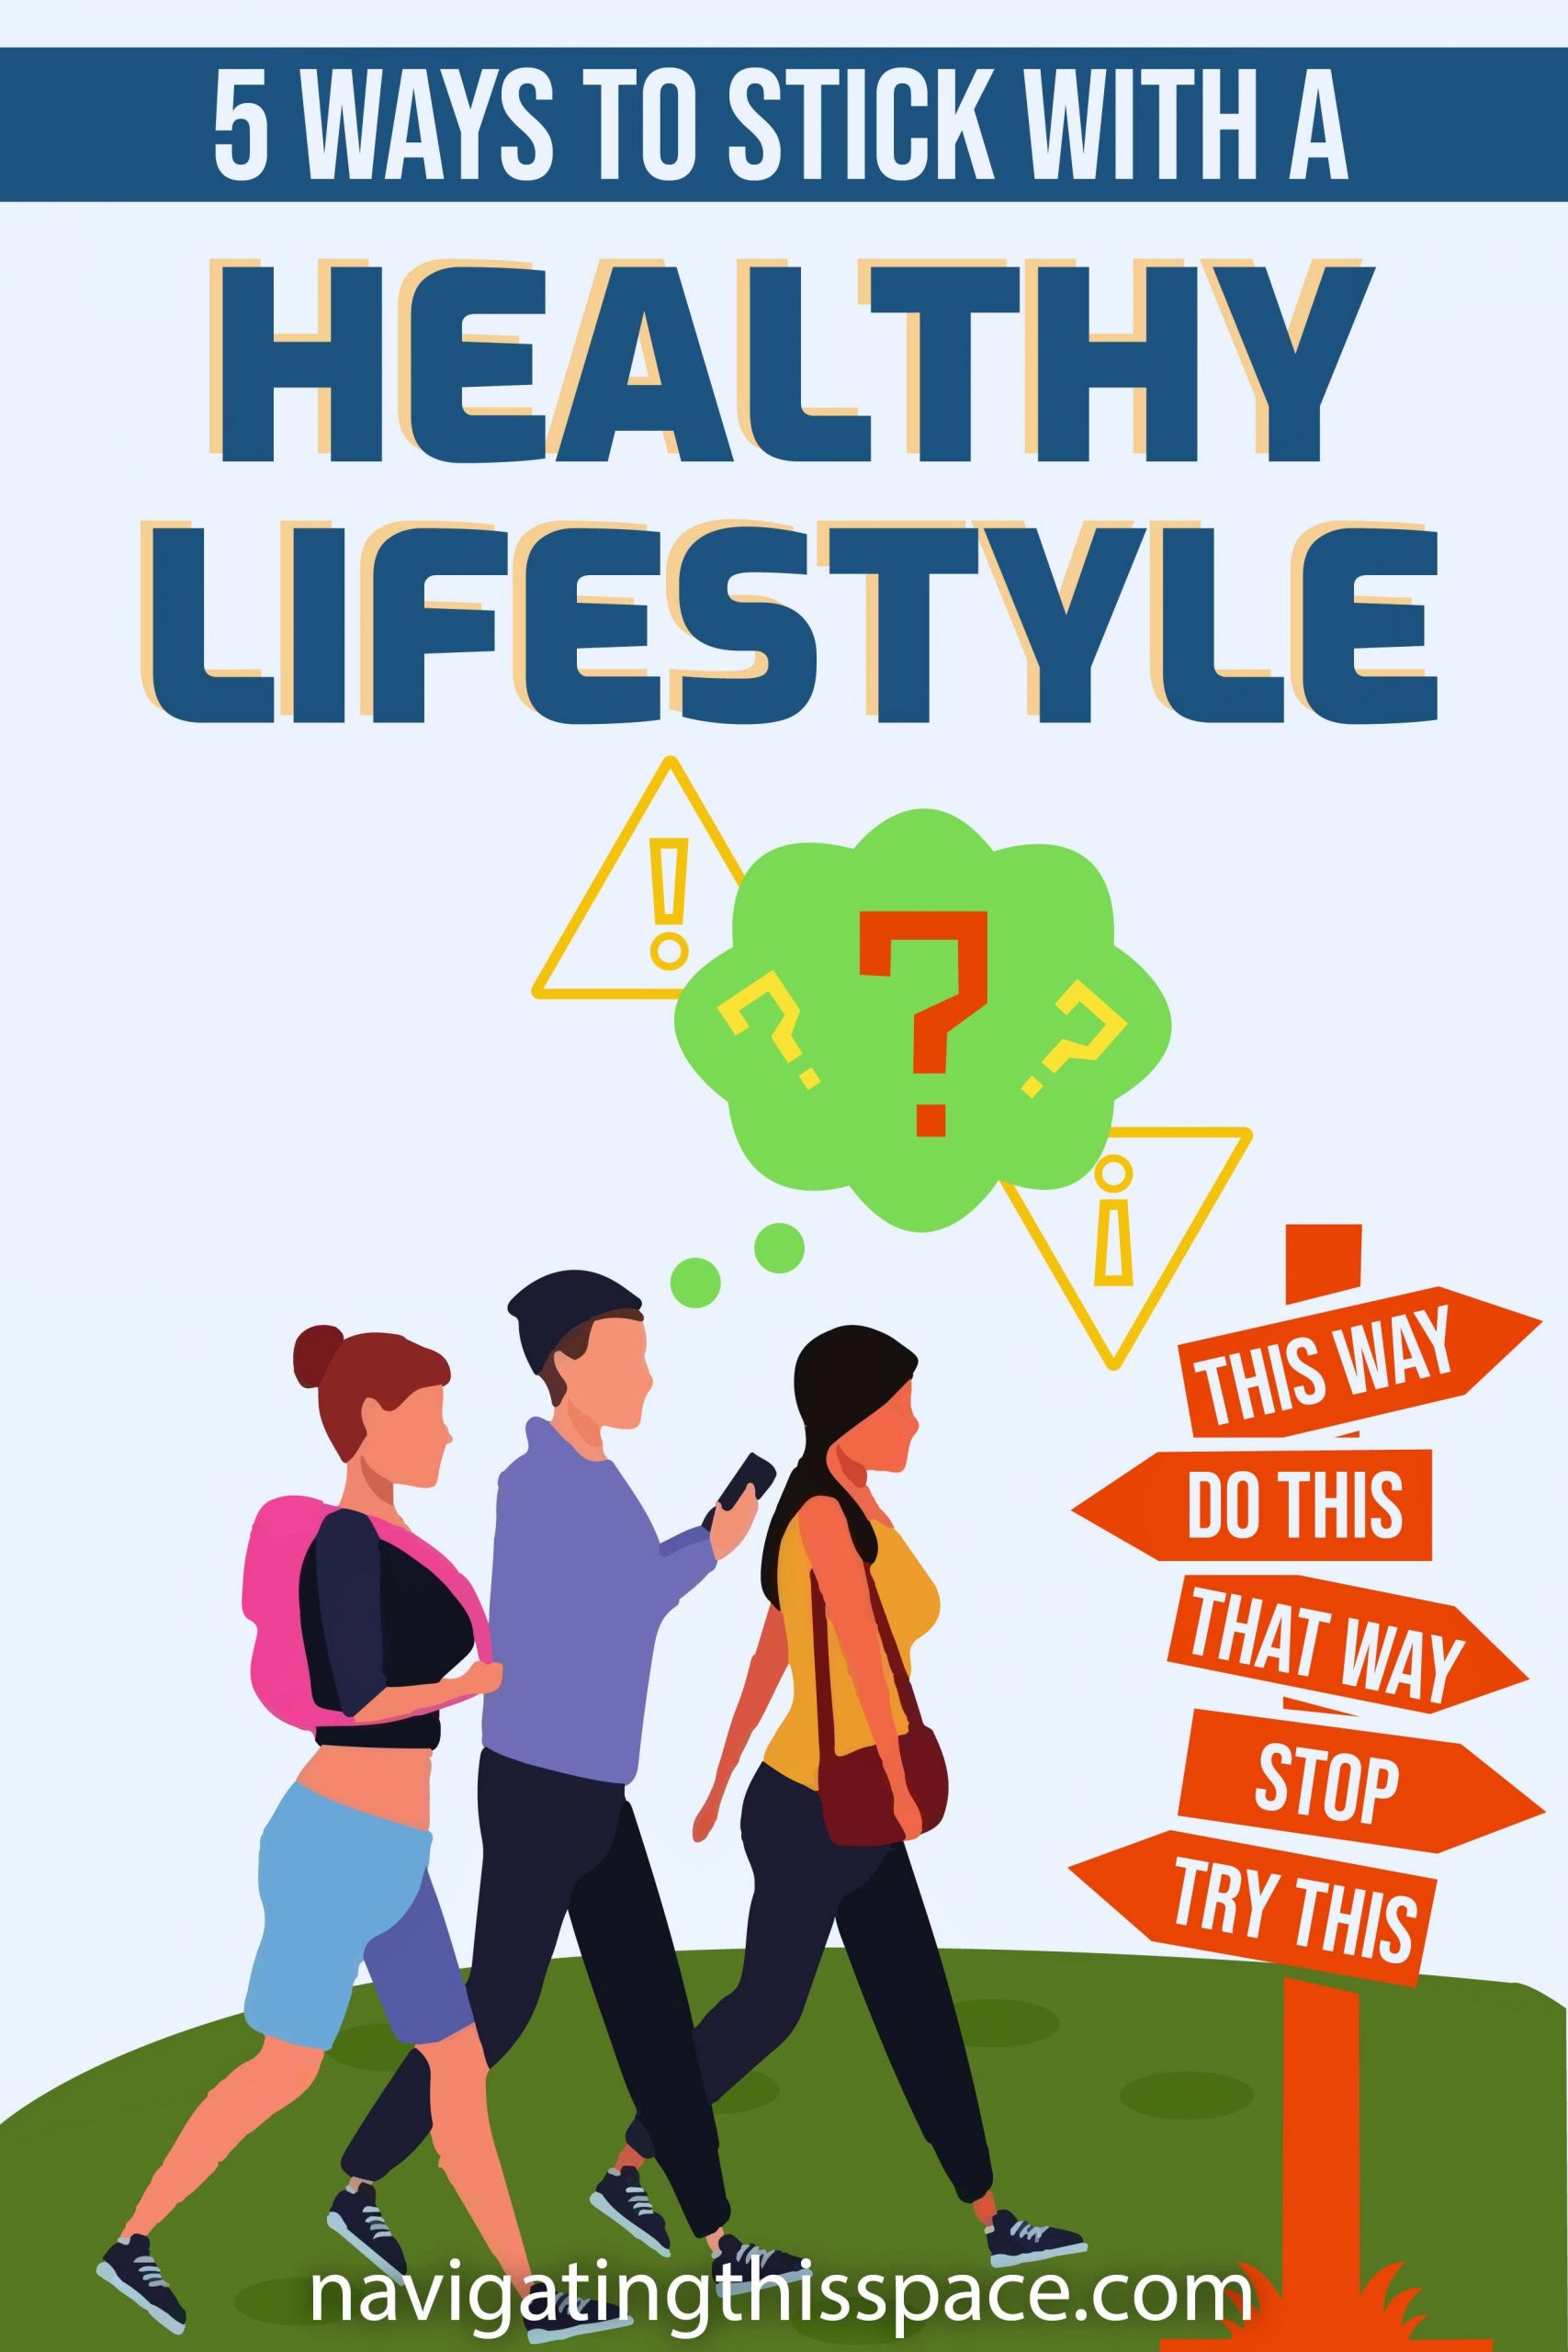 5 Ways to stick with a healthy lifestyle